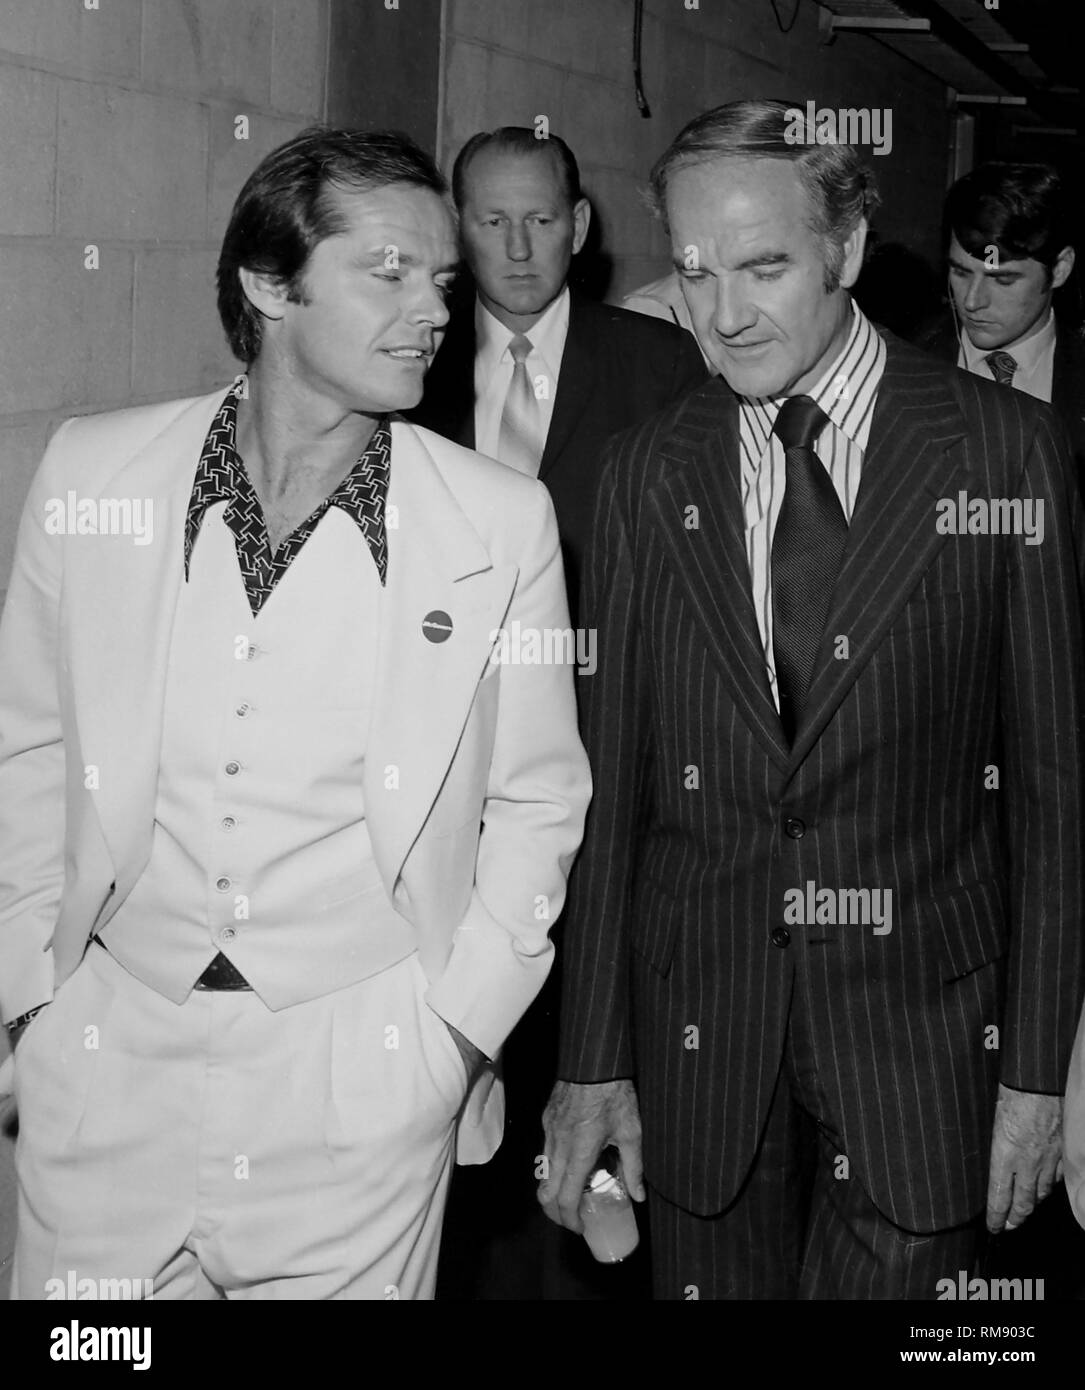 Actor Jack Nicholson talks with Presidential candidate George McGovern before a fundraising concert in April 15, 1972 at The Forum in Los Angeles featuring James Taylor, Carole KIng, Barbra Streisand and Quincy Jones. Stock Photo